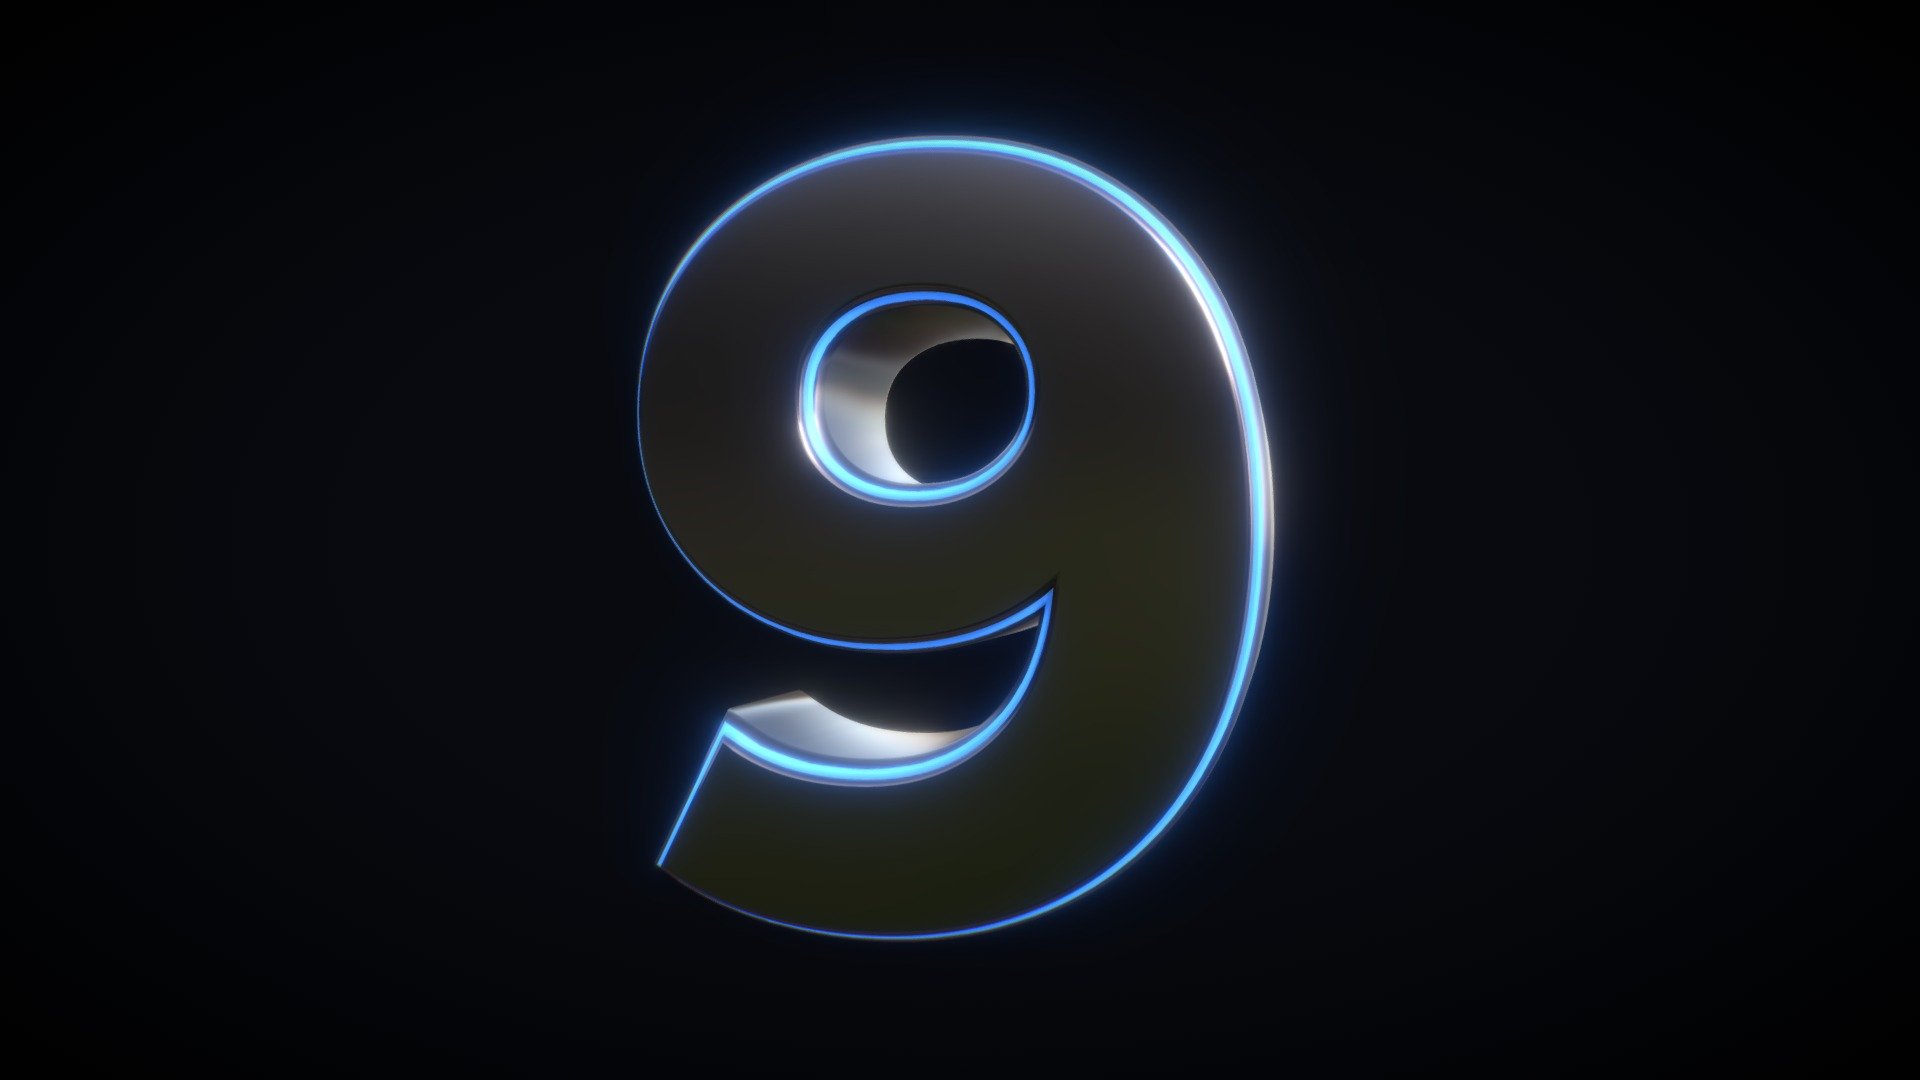 3D model of Number Nine
I've created this model for free countdown video, you can watch it here: 
YouTube link

If you want to download this video, go here: 
Pixabay link

Here's record of my stream where I'm making it:
YouTube link - 3D Number - 9 (NINE) - Download Free 3D model by Jihambru 3d model